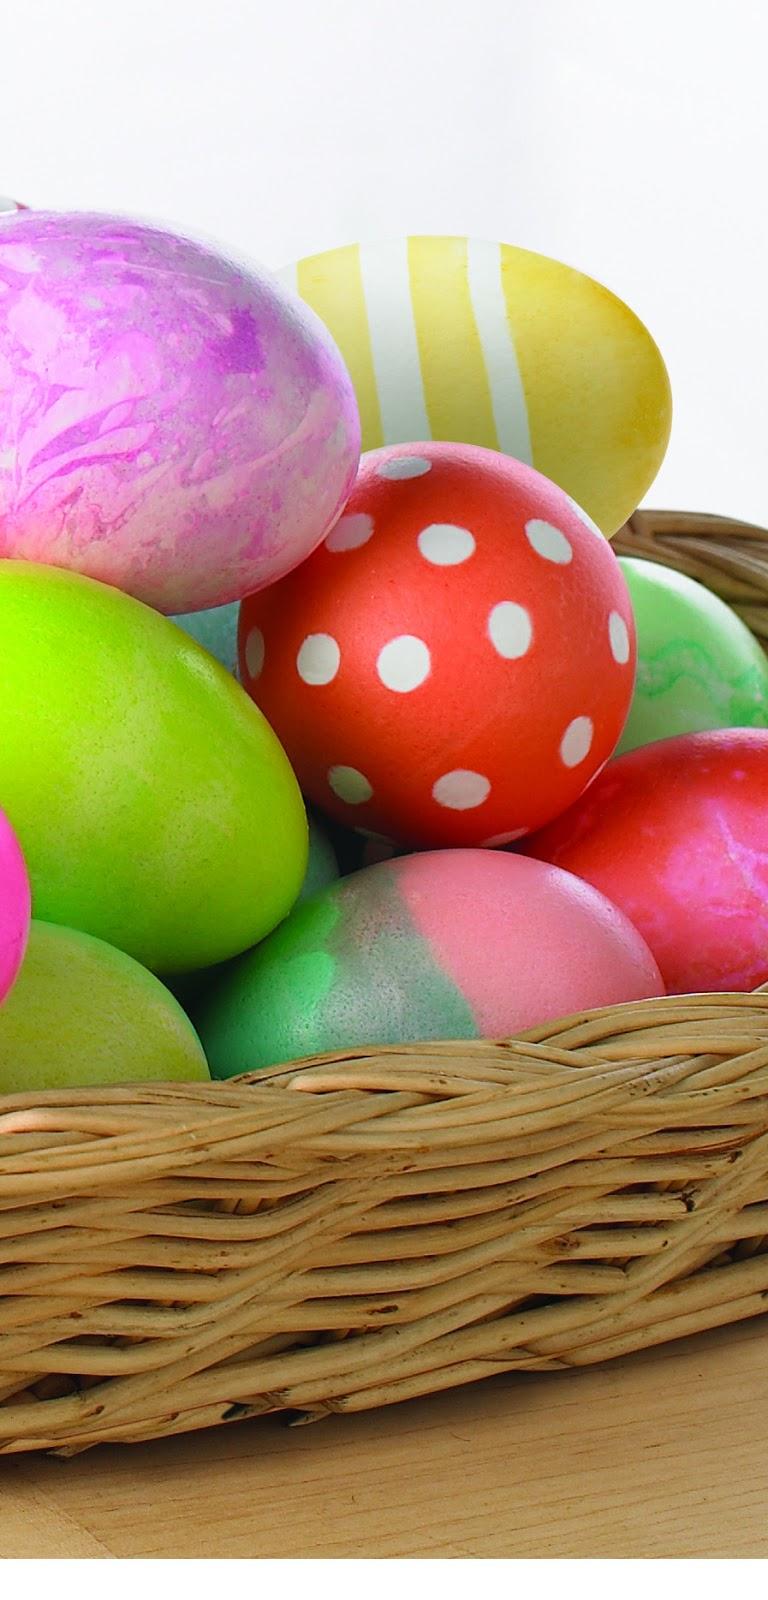 Free Easter Wallpaper for iPhone